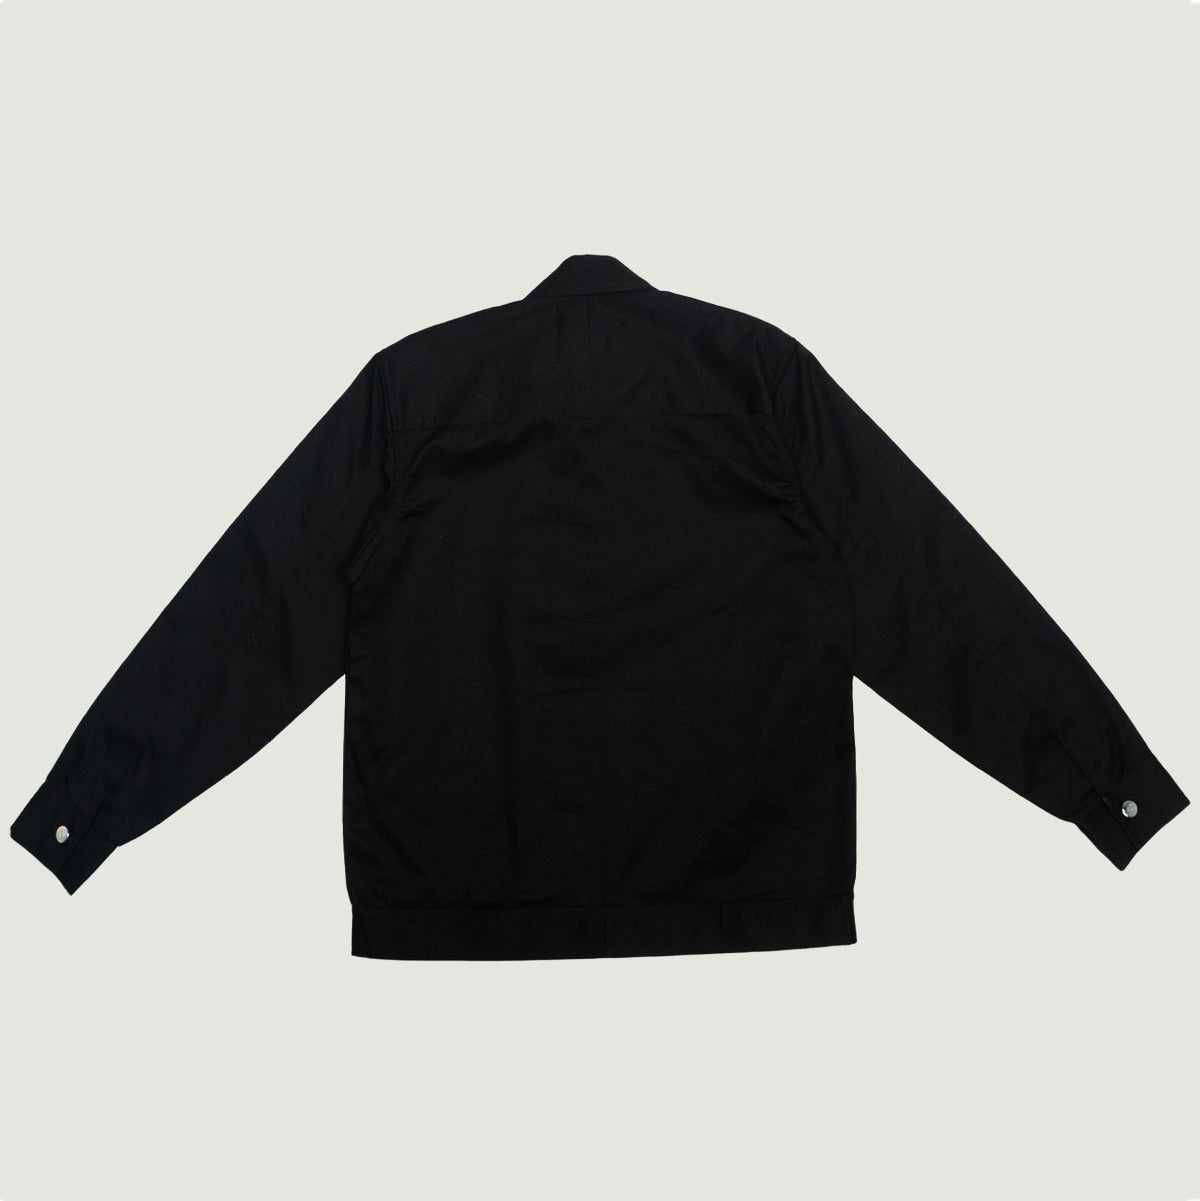 Bushman work black jacket with patches